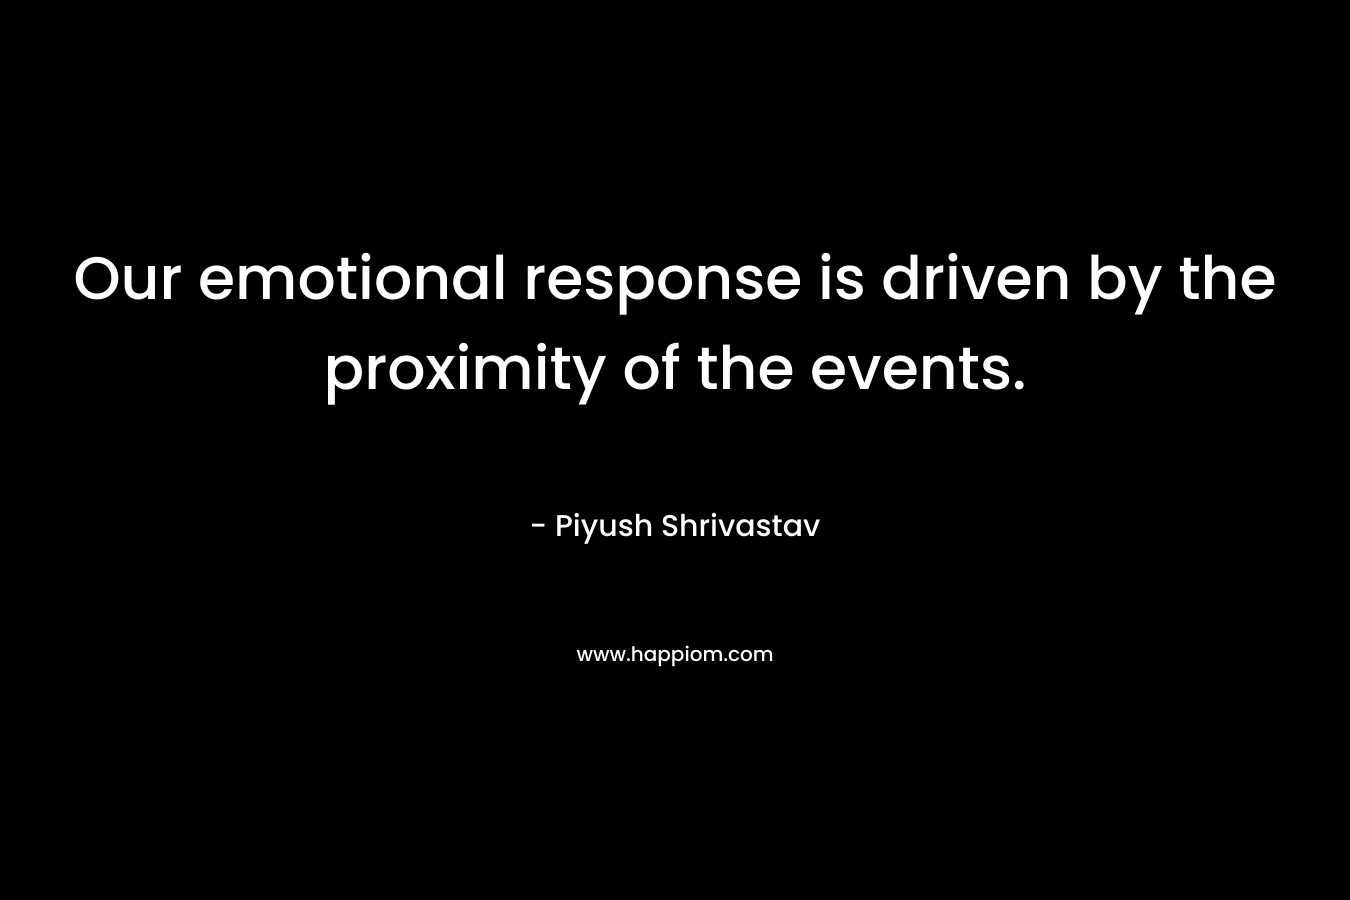 Our emotional response is driven by the proximity of the events.